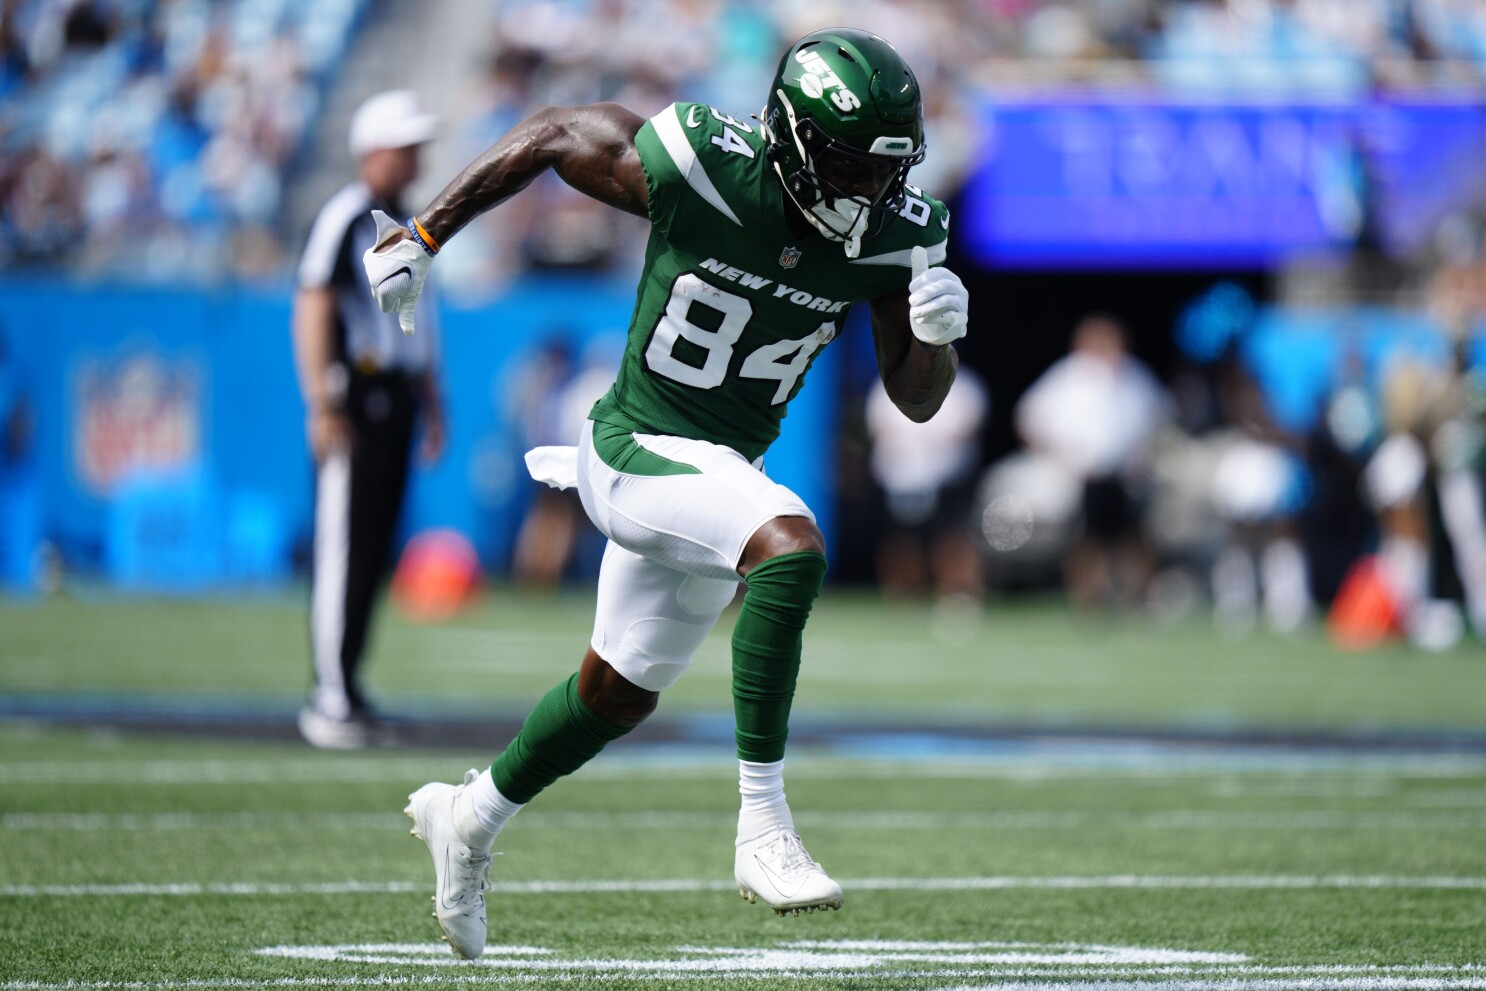 Jets wide receiver Corey Davis announces he's stepping away from football